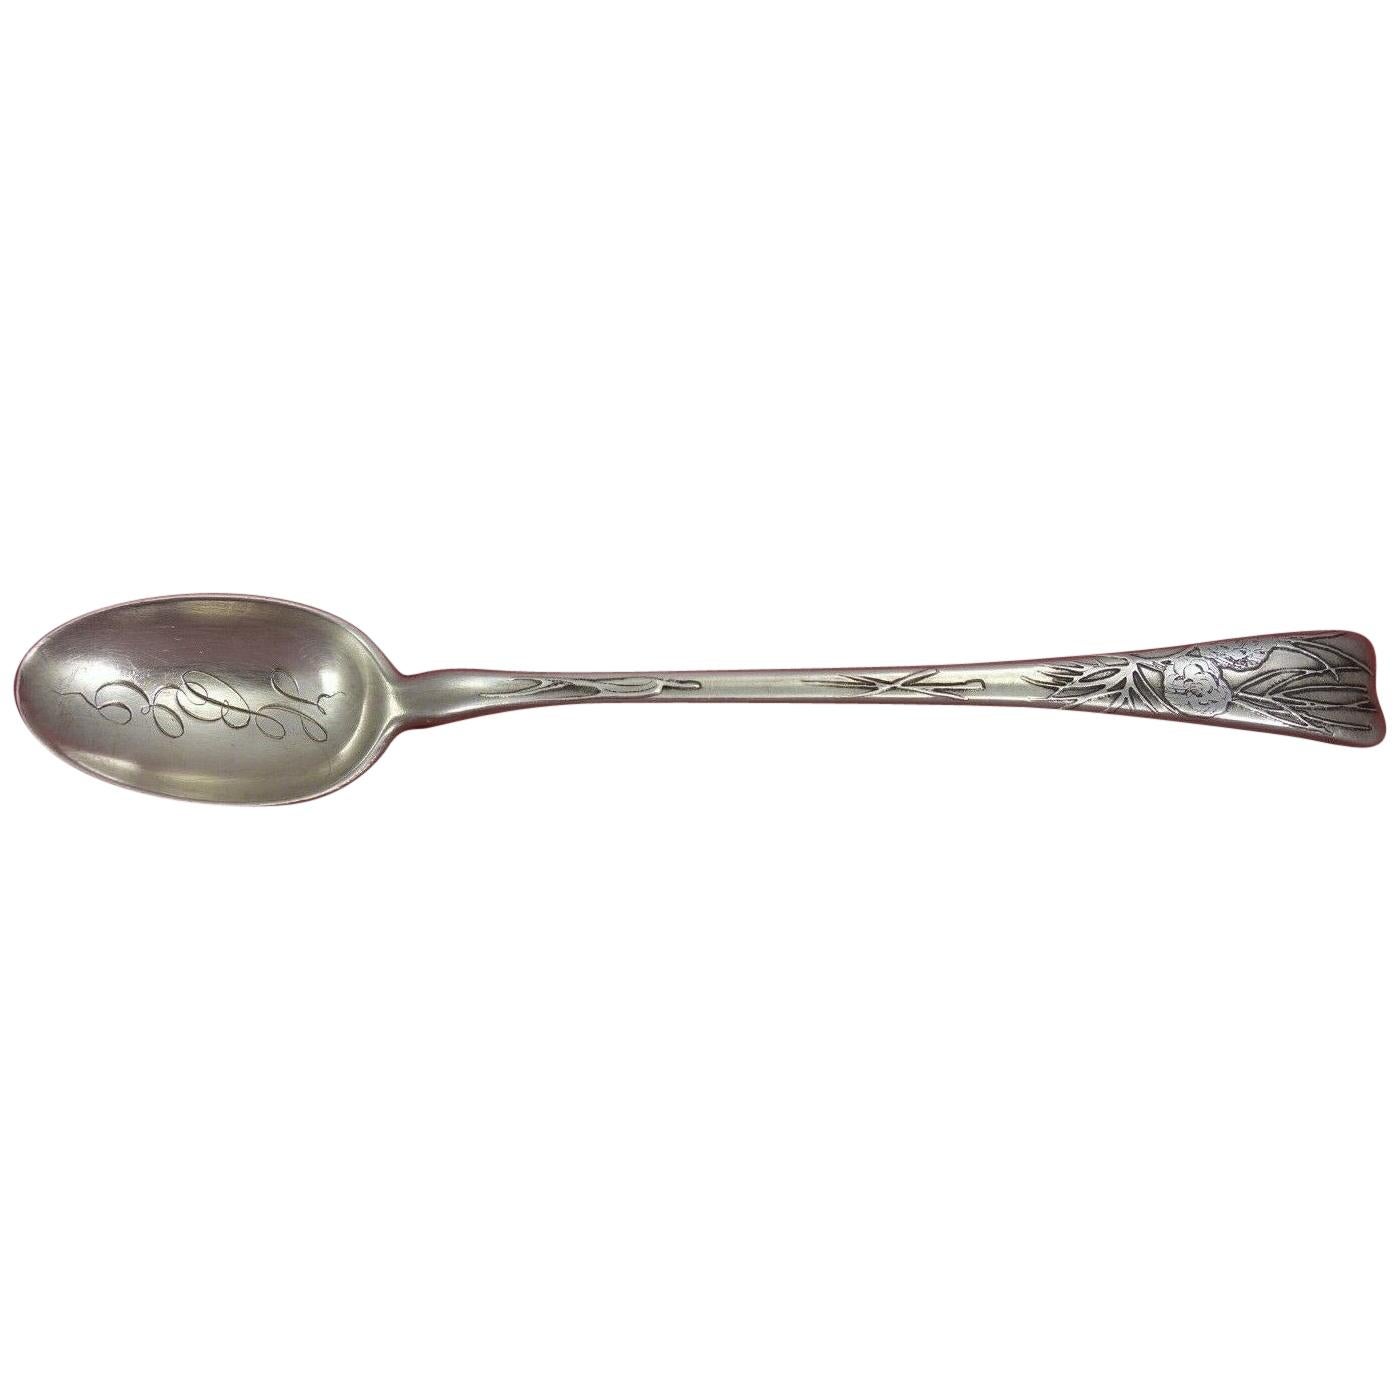 Sterling silver parfait spoon with floral design 6